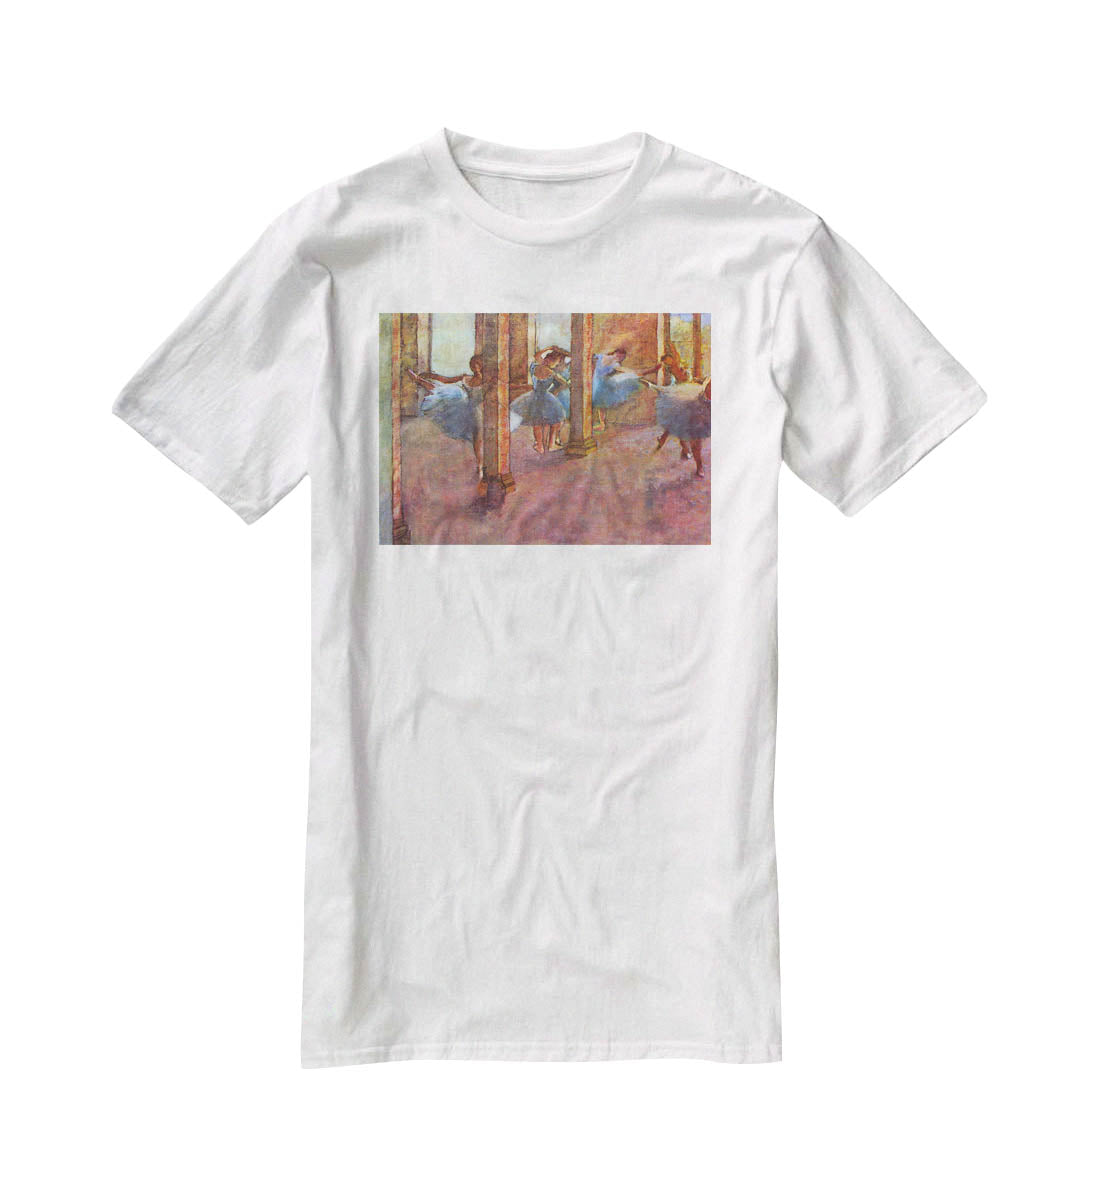 Dancers in the Foyer by Degas T-Shirt - Canvas Art Rocks - 5